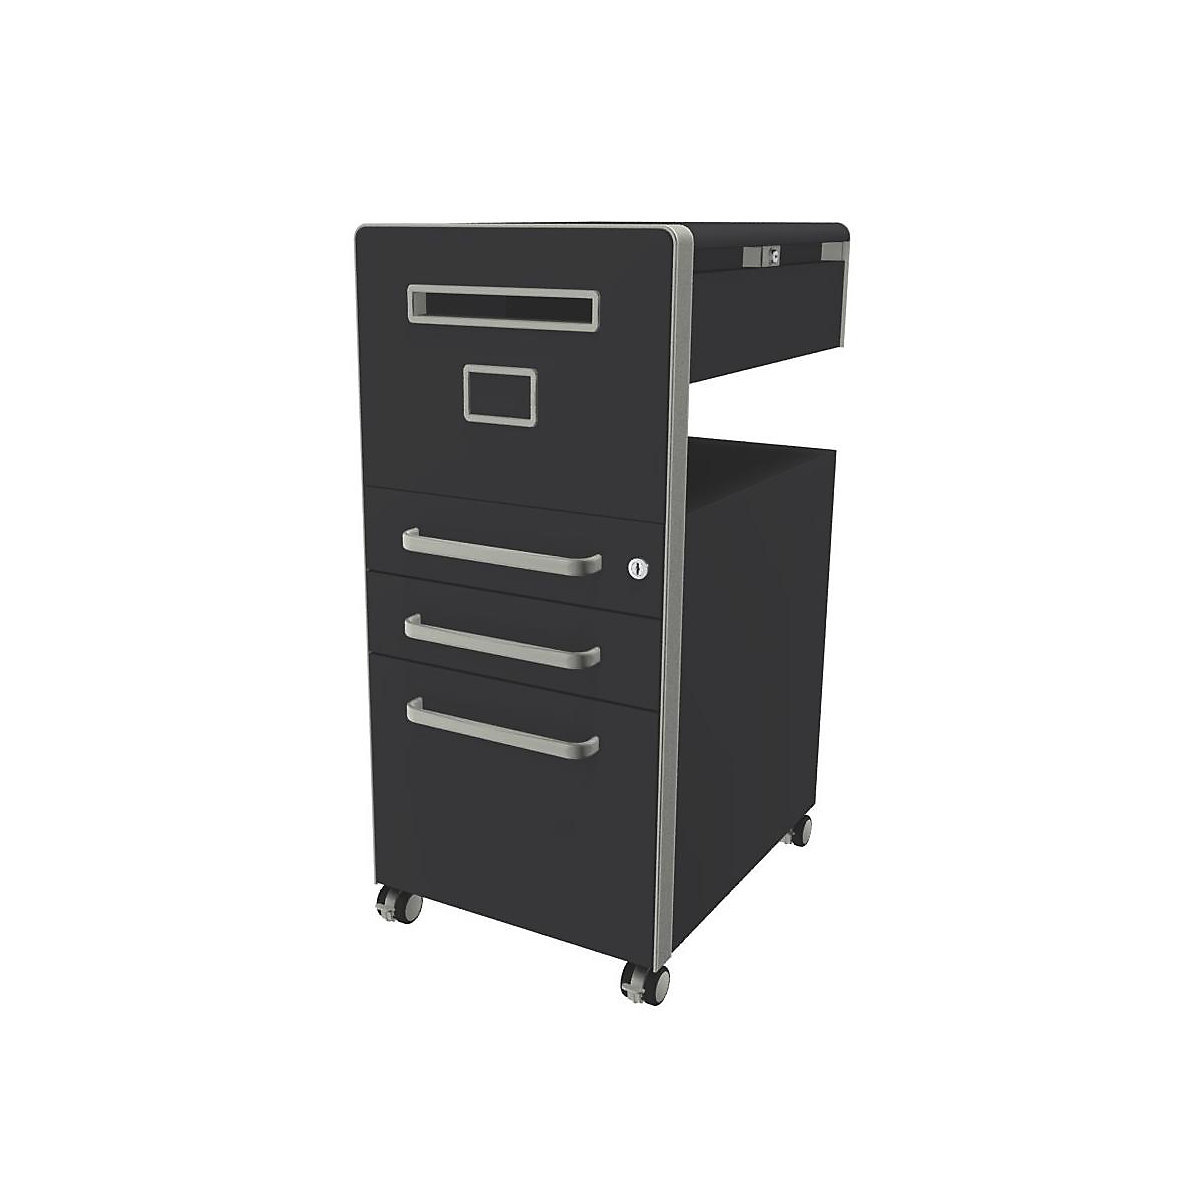 Bite™ pedestal furniture, with 1 whiteboard, opens on the left side – BISLEY, with 2 universal drawers, 1 suspension file drawer, charcoal-13